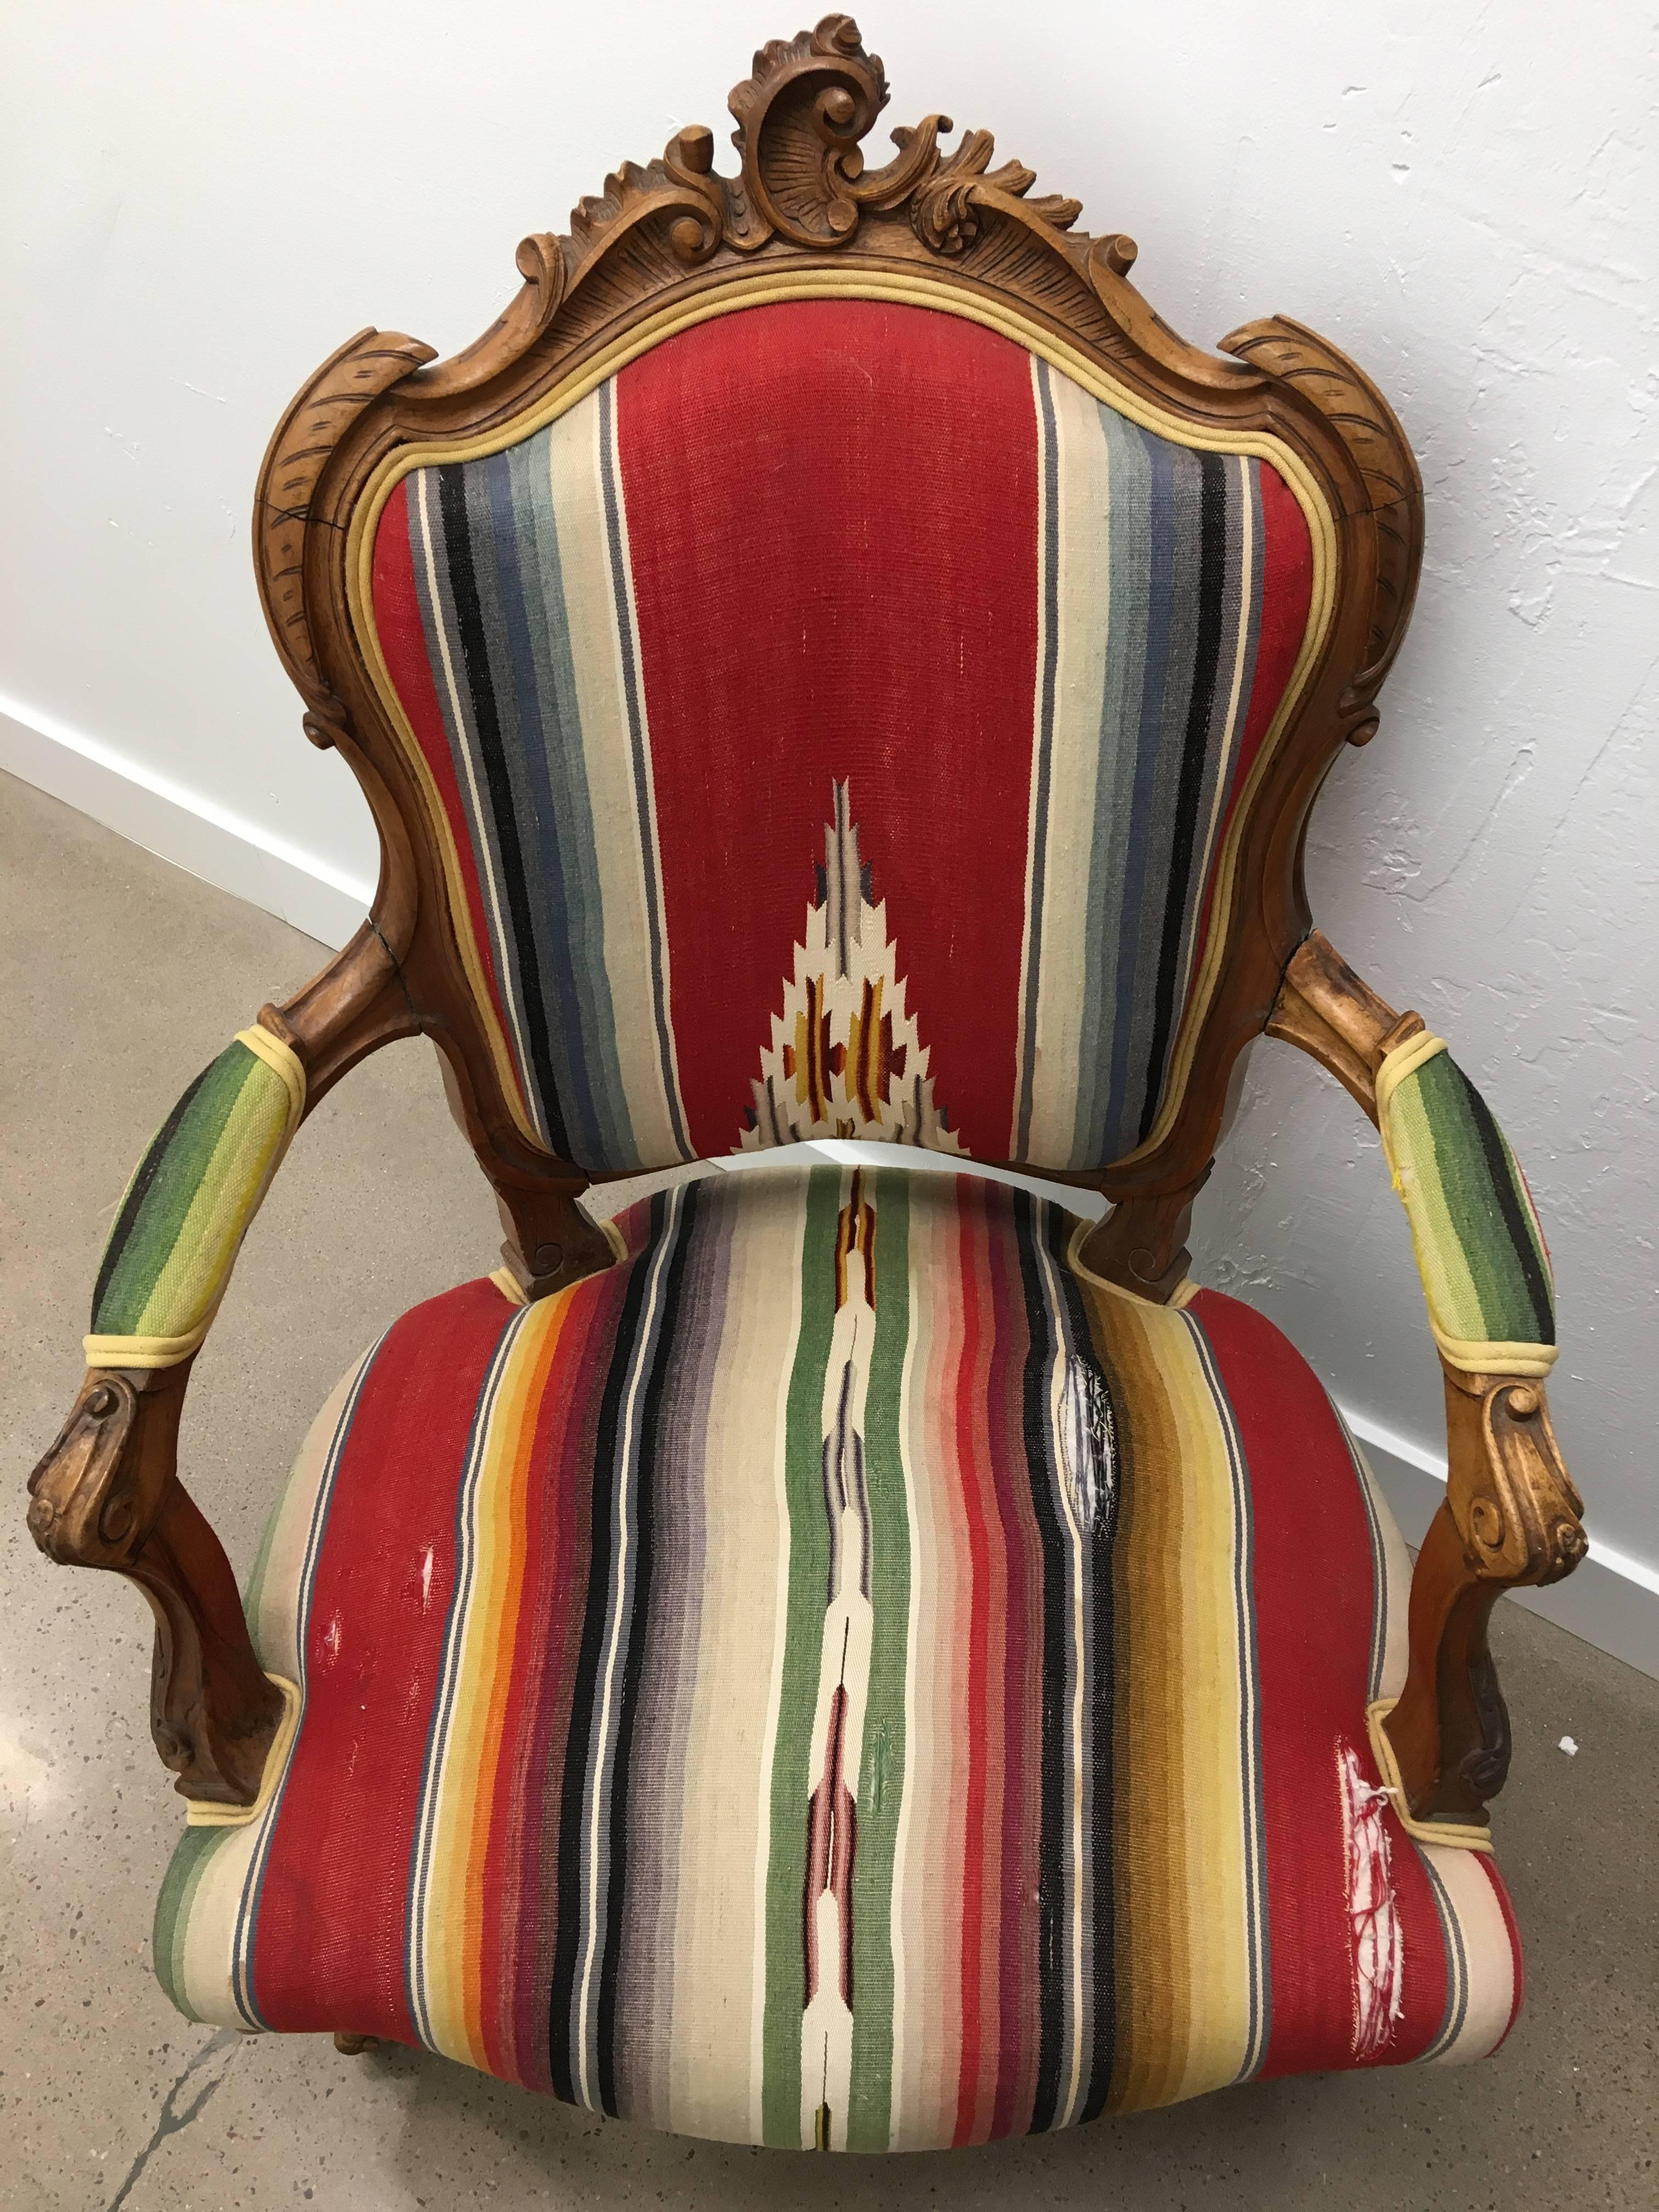 A charming French bergere chair upholstered in a timeworn vintage Mexican serape fabric. A lovely corner chair addition in any space.